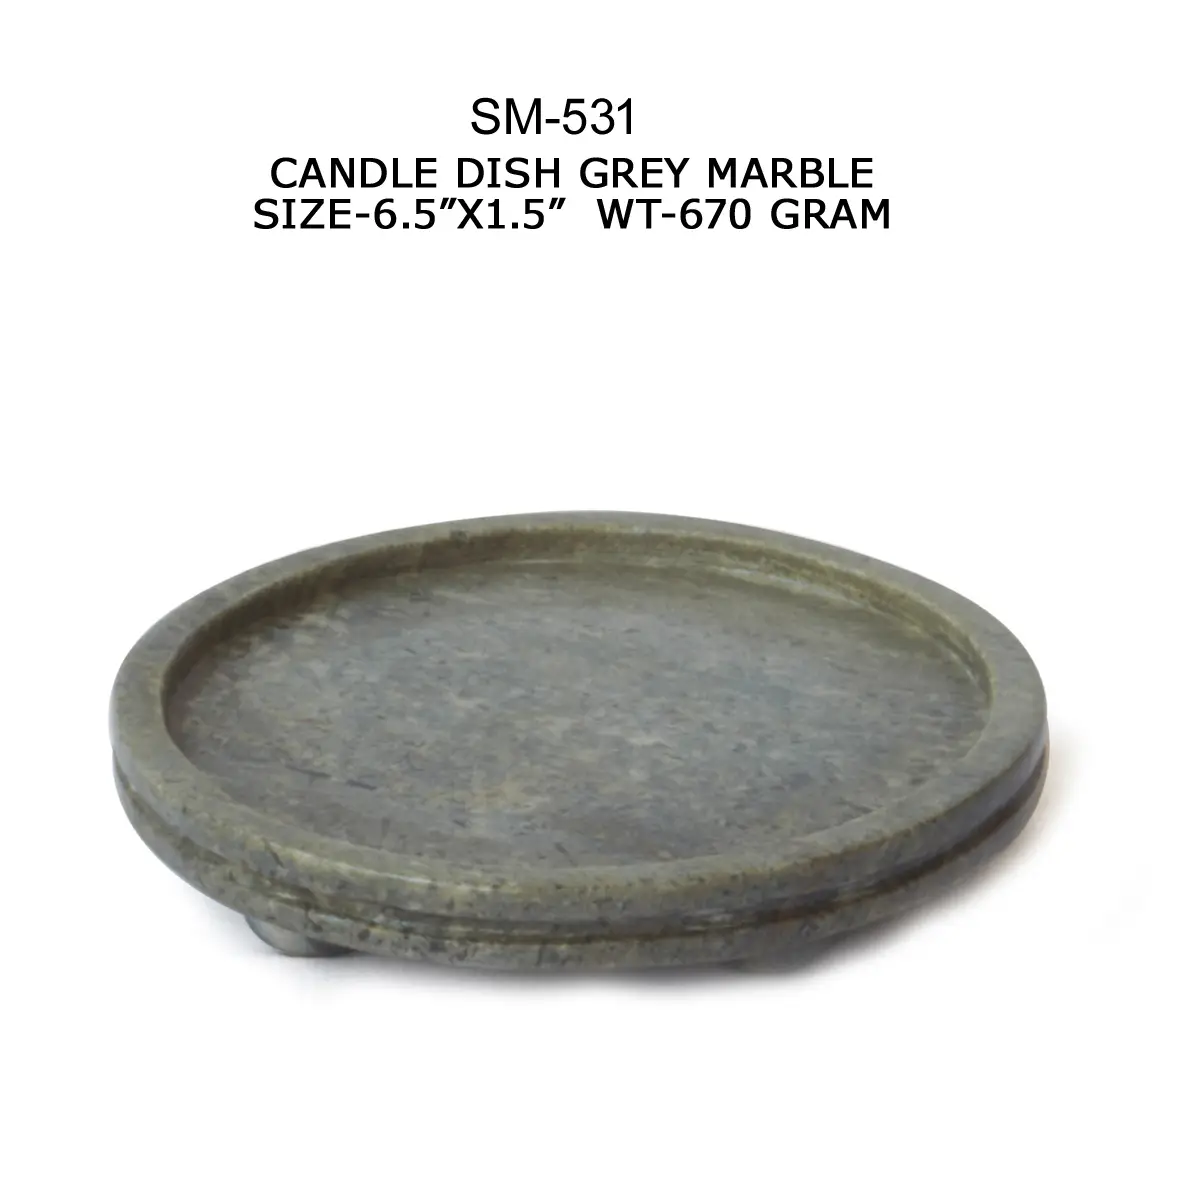 CANDLE DISH GREY MARBLE